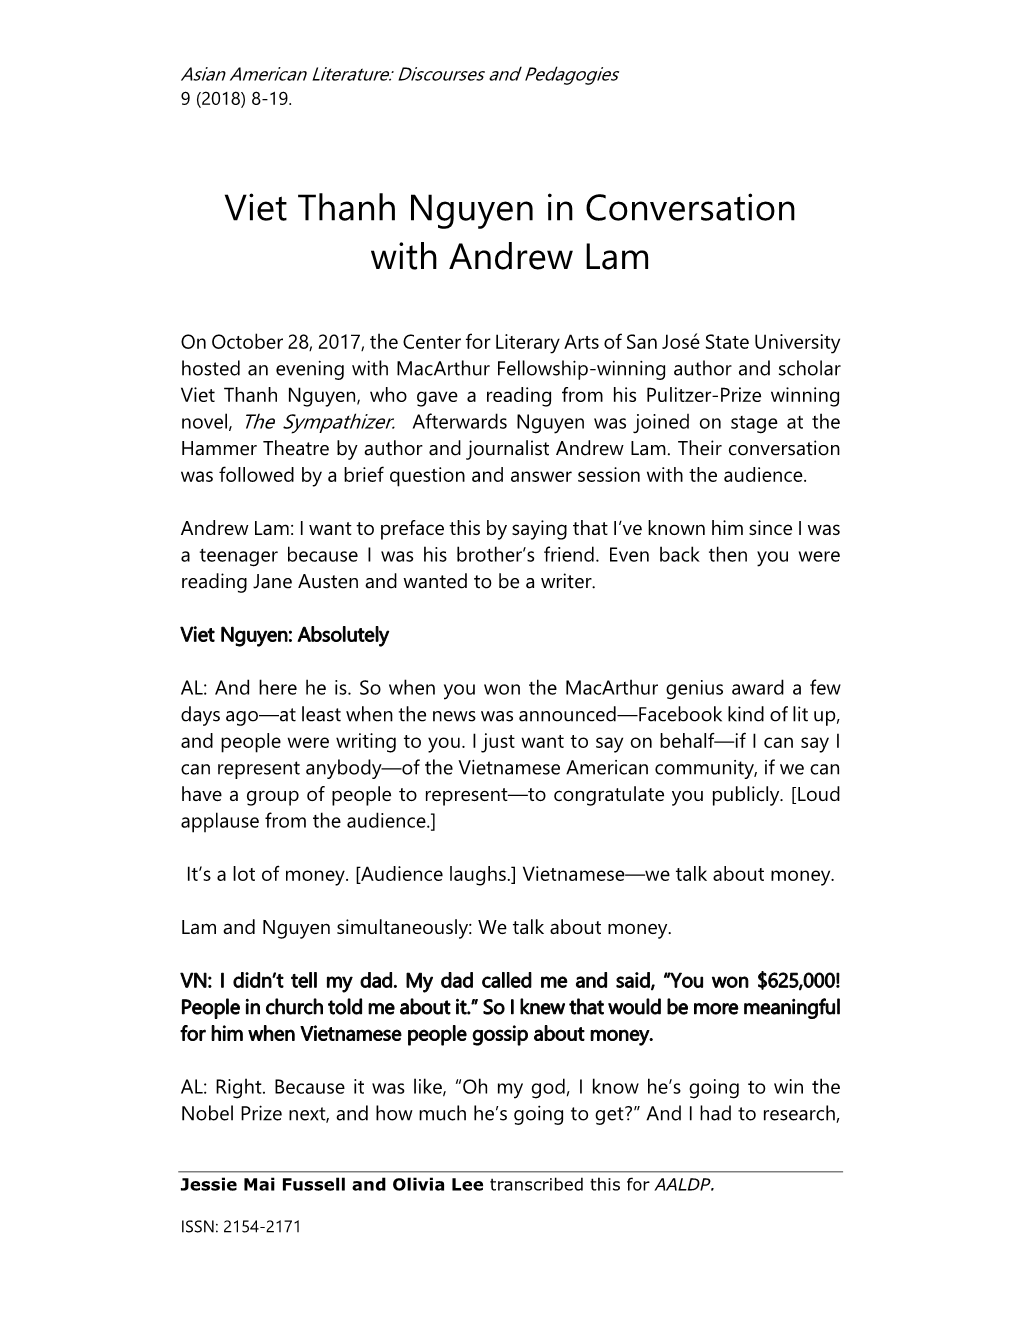 Viet Thanh Nguyen in Conversation with Andrew Lam